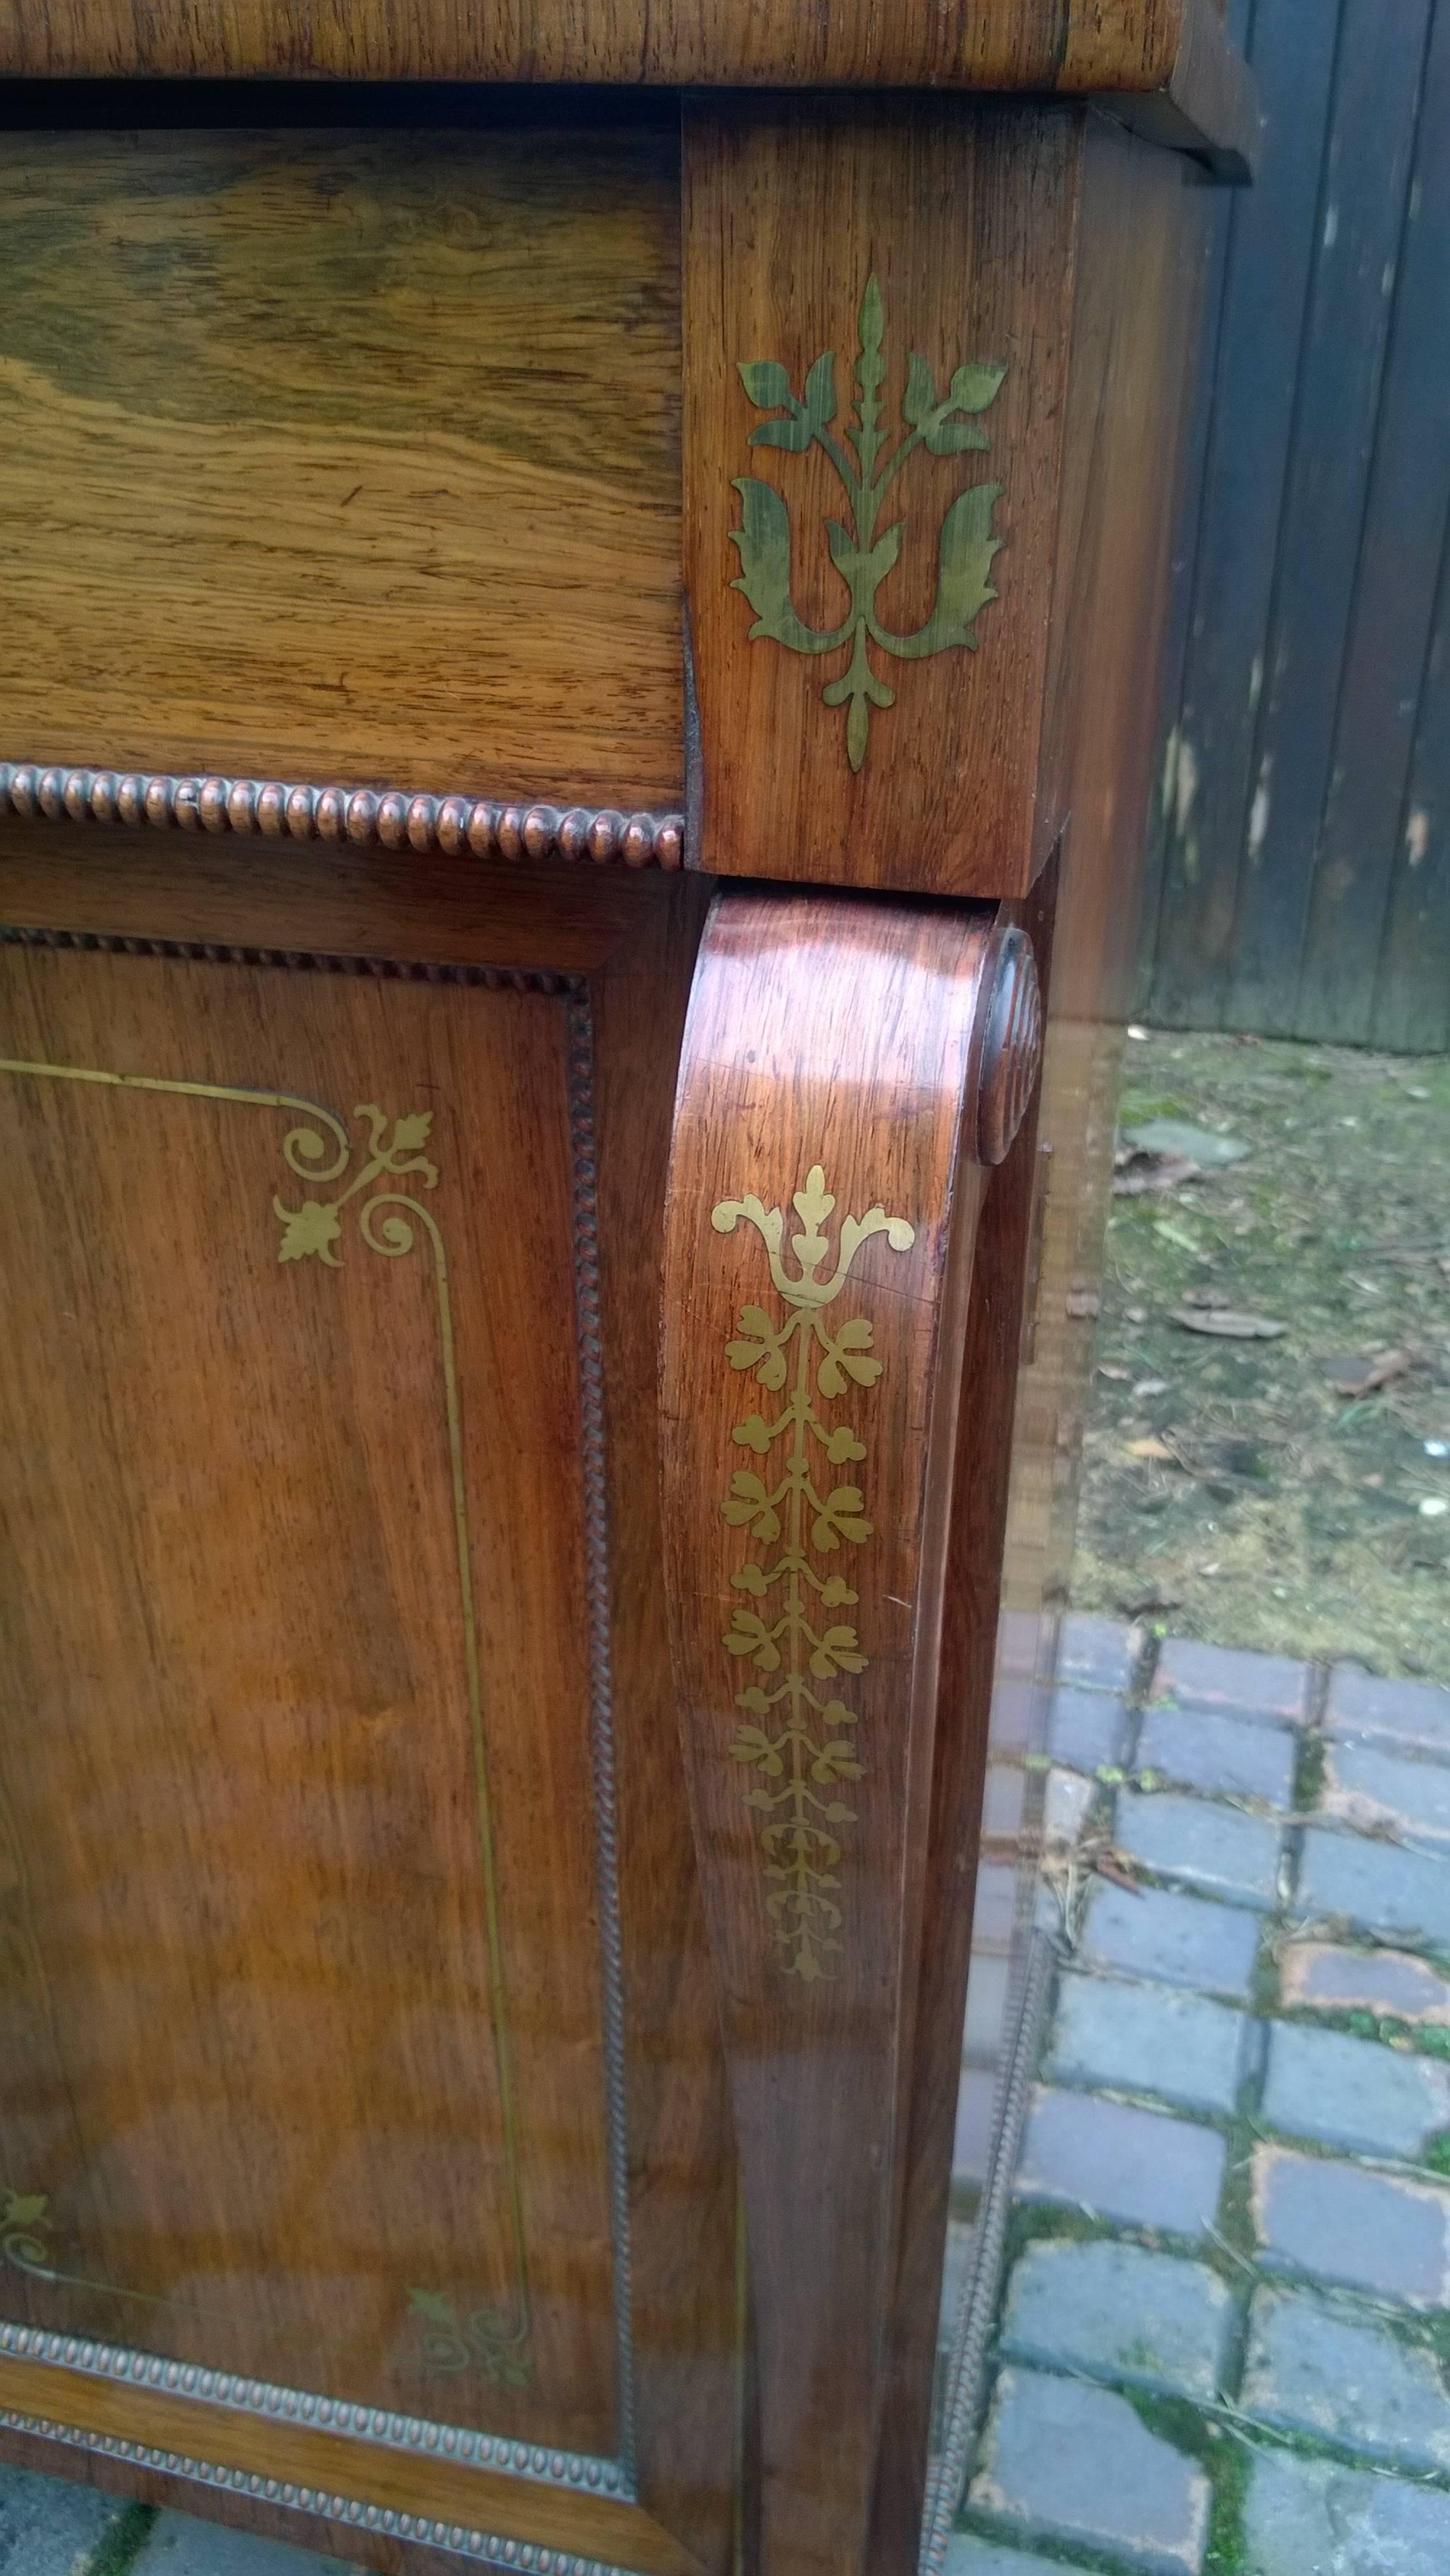 Great Britain (UK) Regency Rosewod and Brass Inlaid Chiffonier